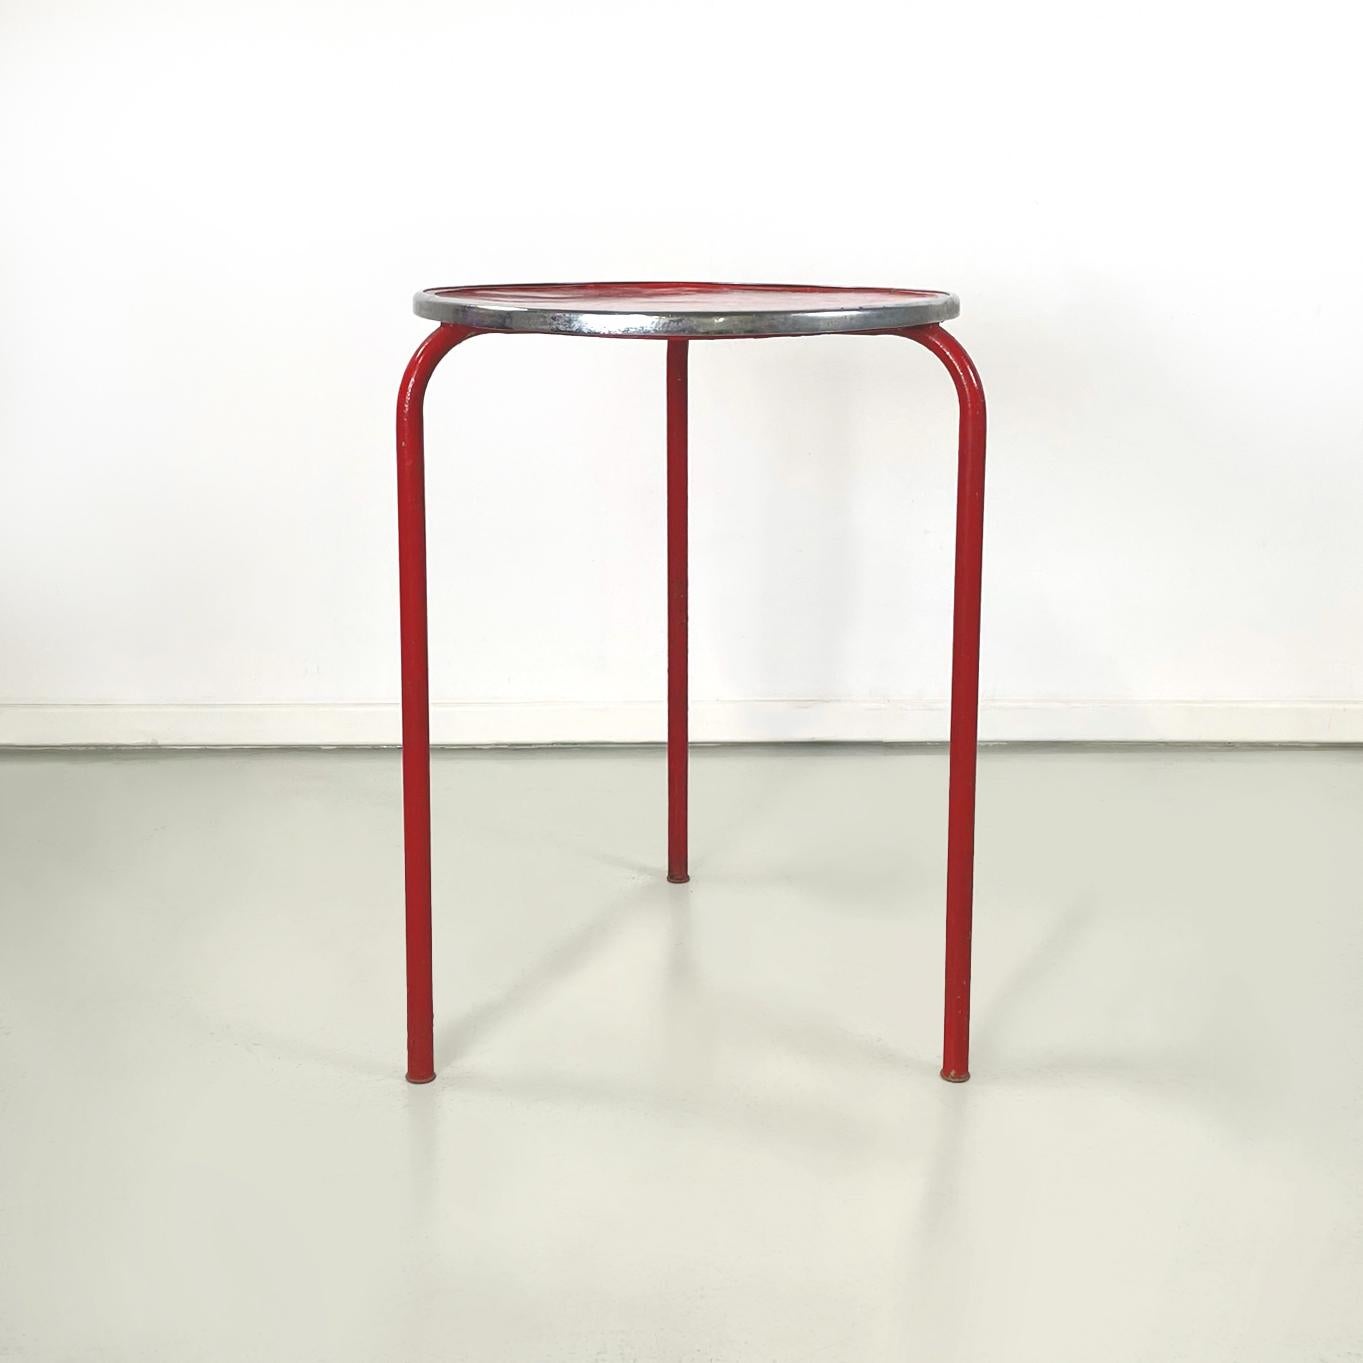 Modern Italian modern round coffee table in red metal, 1980s For Sale